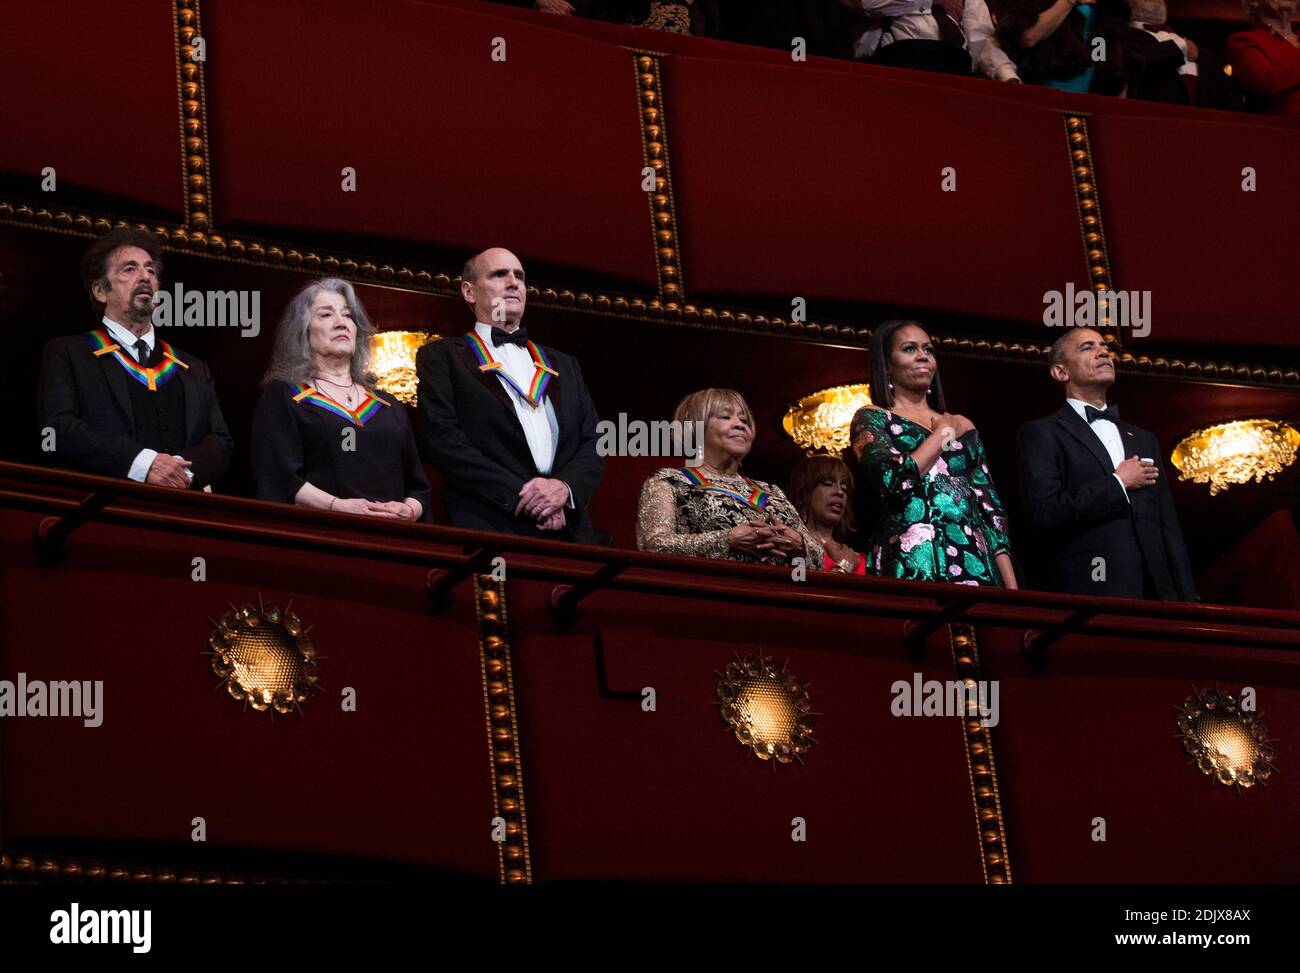 (L-R) 2016 Kennedy Center Honorees actor Al Pacino, pianist Martha Argerich, singer James Taylor, singer Mavis Staples, First Lady Michelle Obama and Us President Barack Obama listen to the National Anthem at the Kennedy Center, December 4, 2016, Washington, DC. (Pool/Aude Guerrucci) Stock Photo